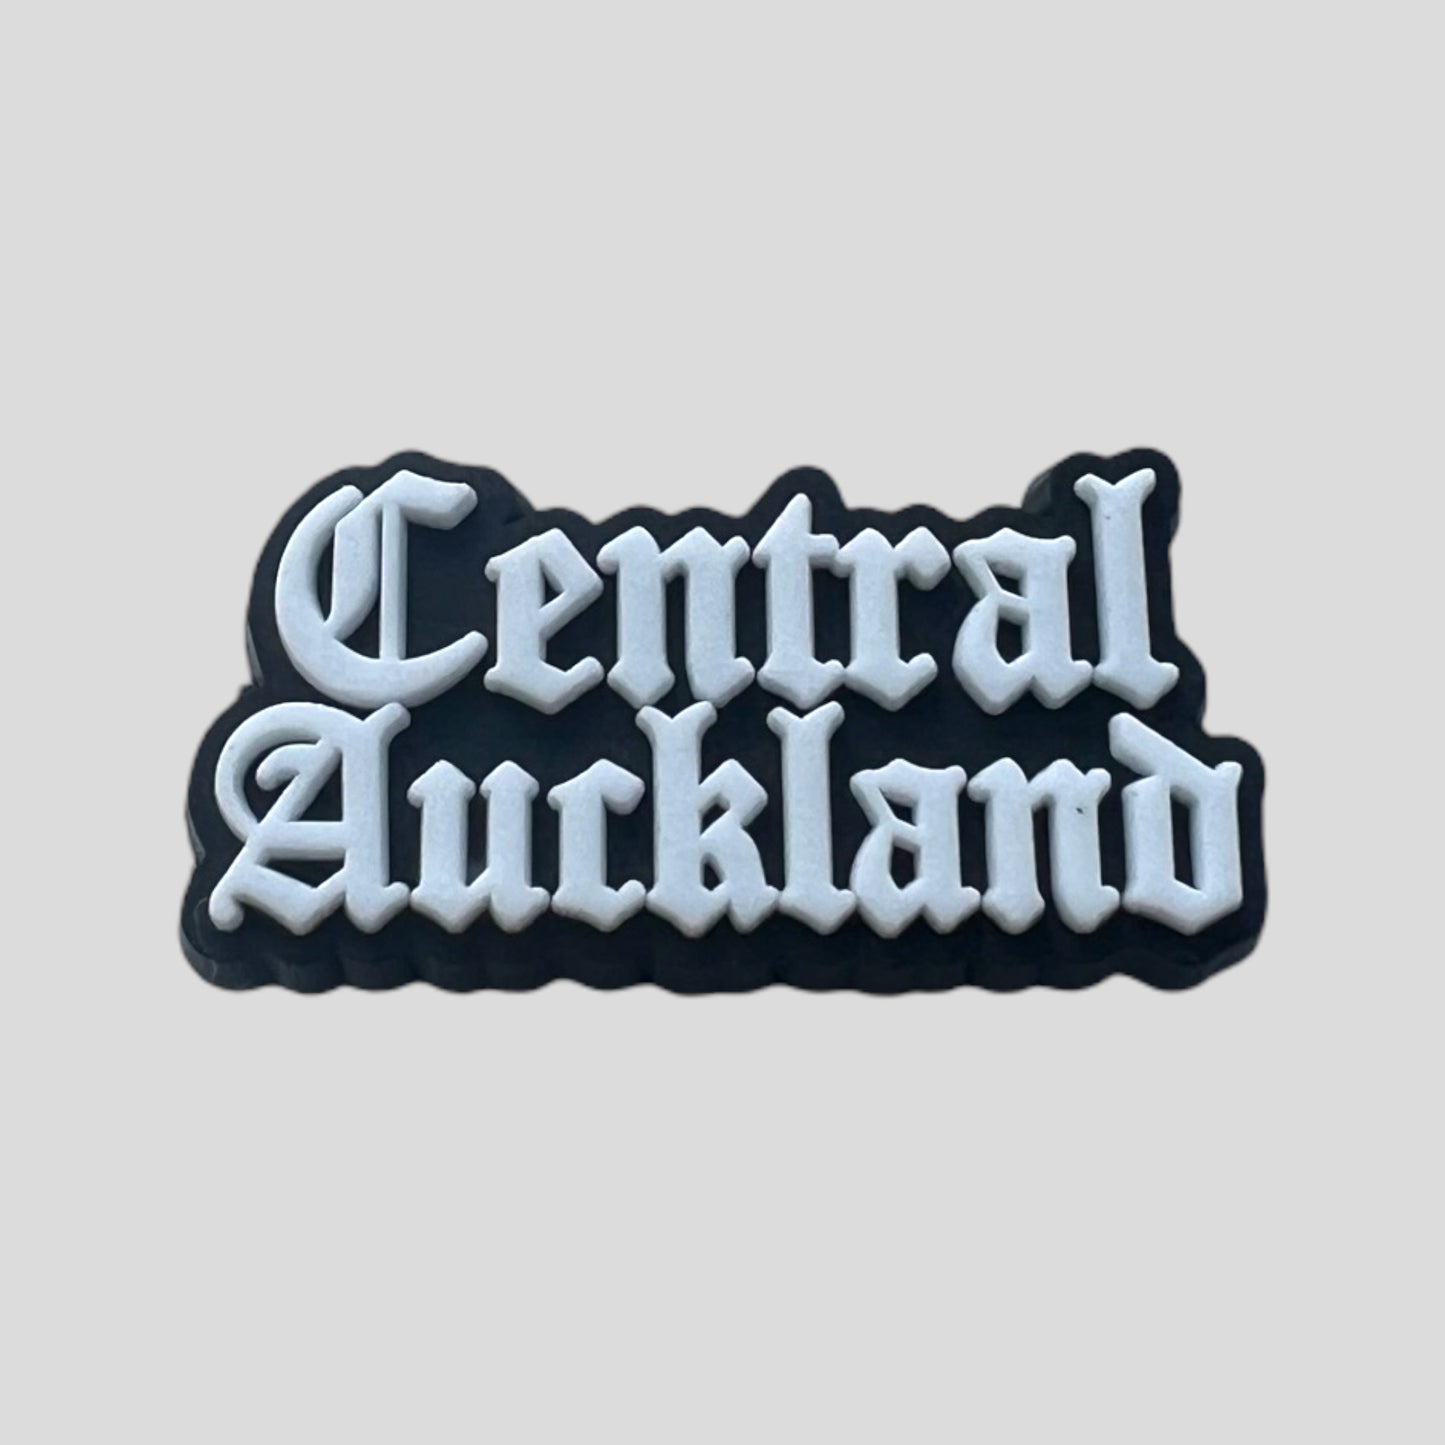 Central Auckland | New Zealand